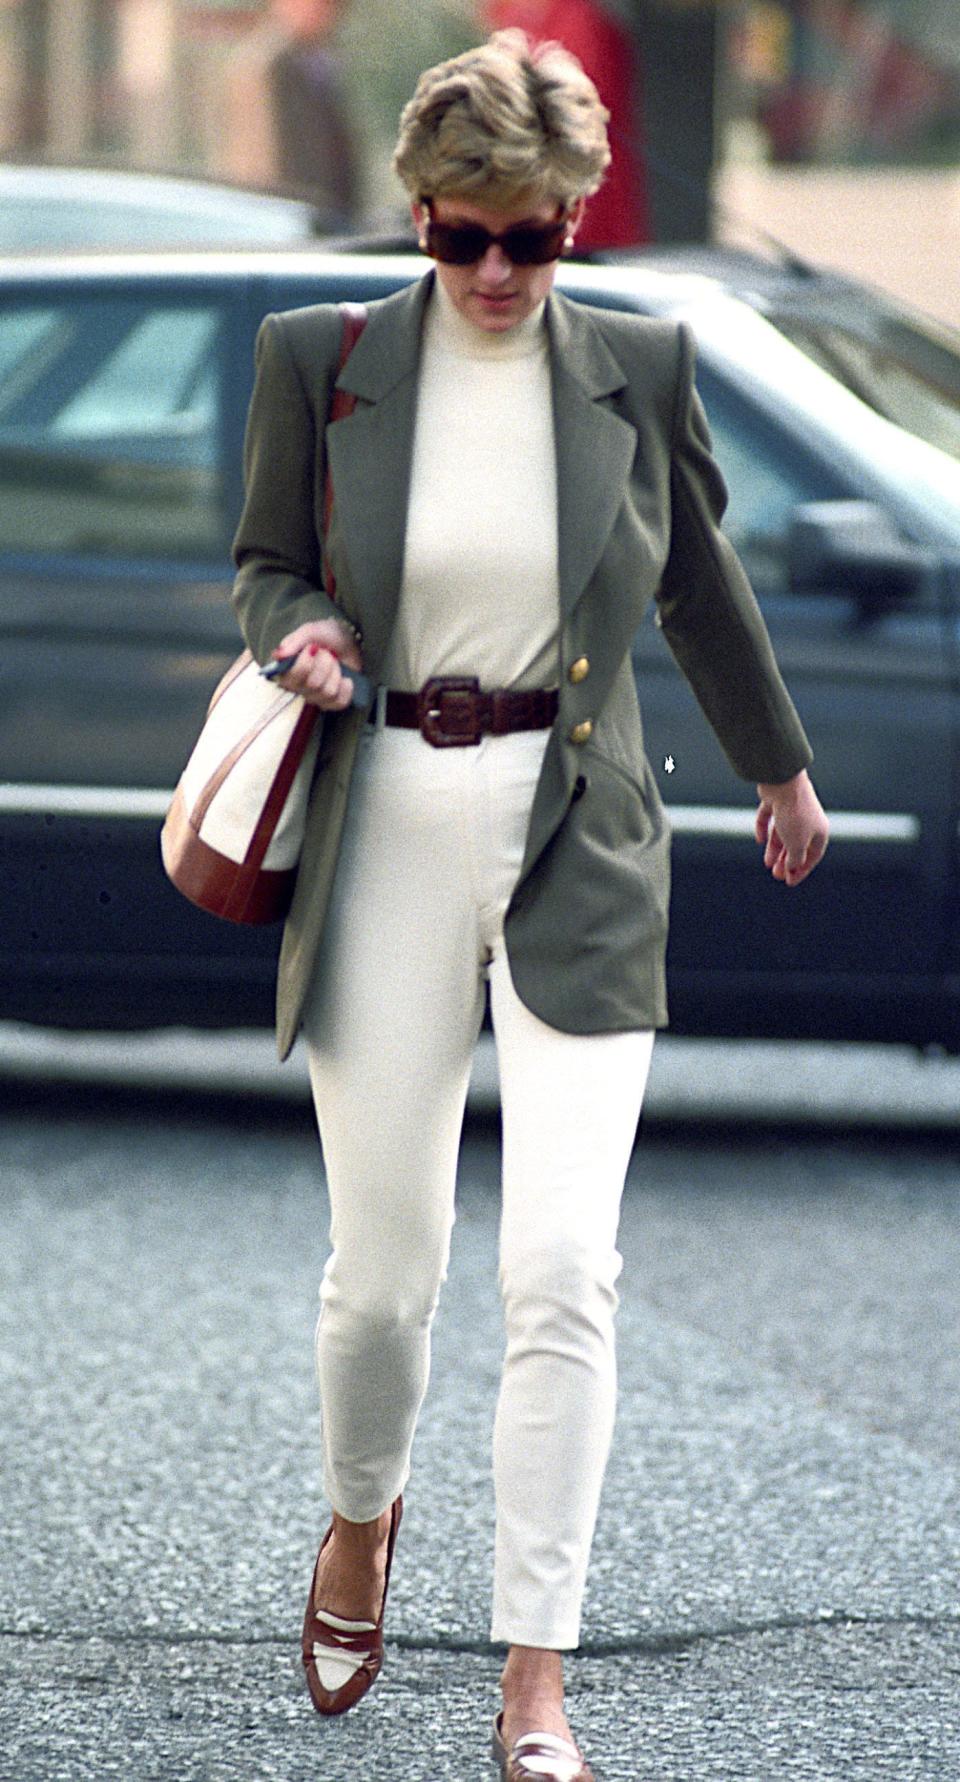 princess diana wearing a green jacket, white sweater, and white pants